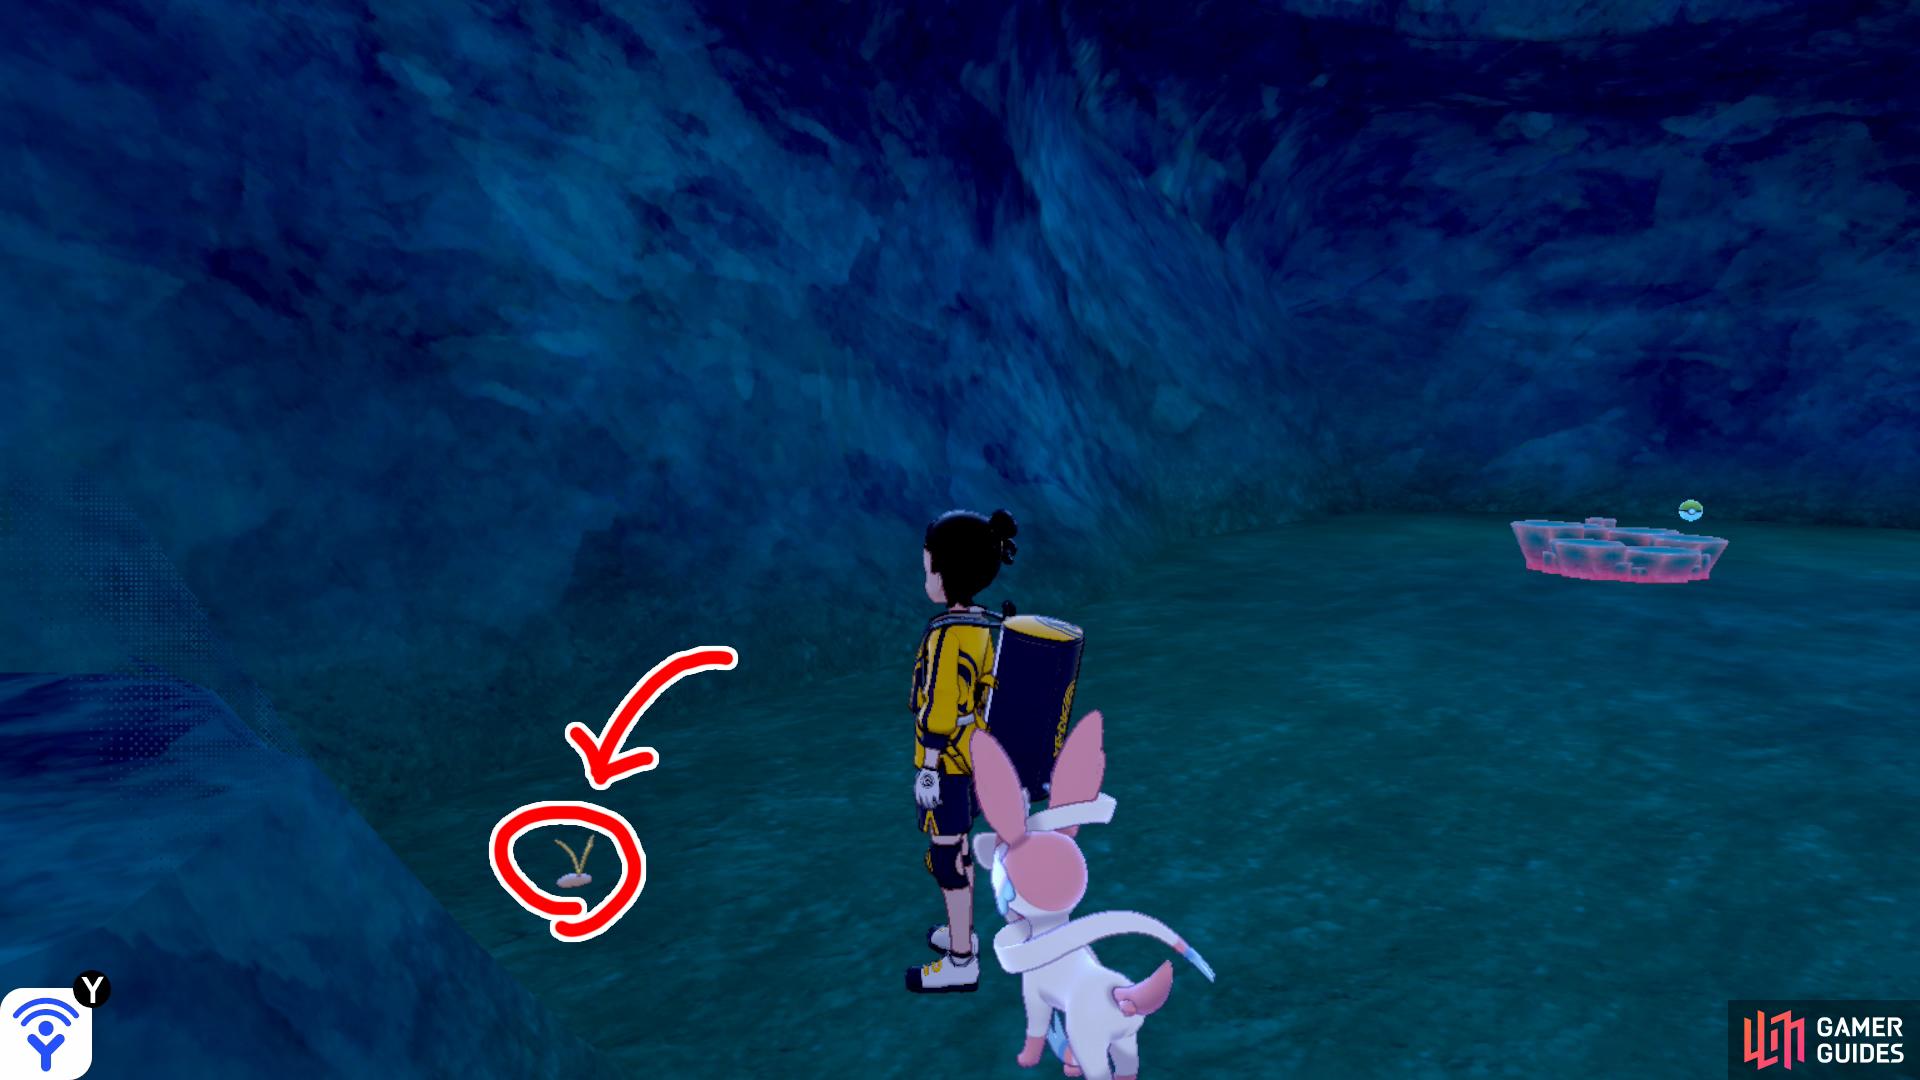 4/7: From Diglett 3, face the nearby Pokémon Den. Then head in that direction. Soon, you should catch a glimpse of it to the right of a boulder.